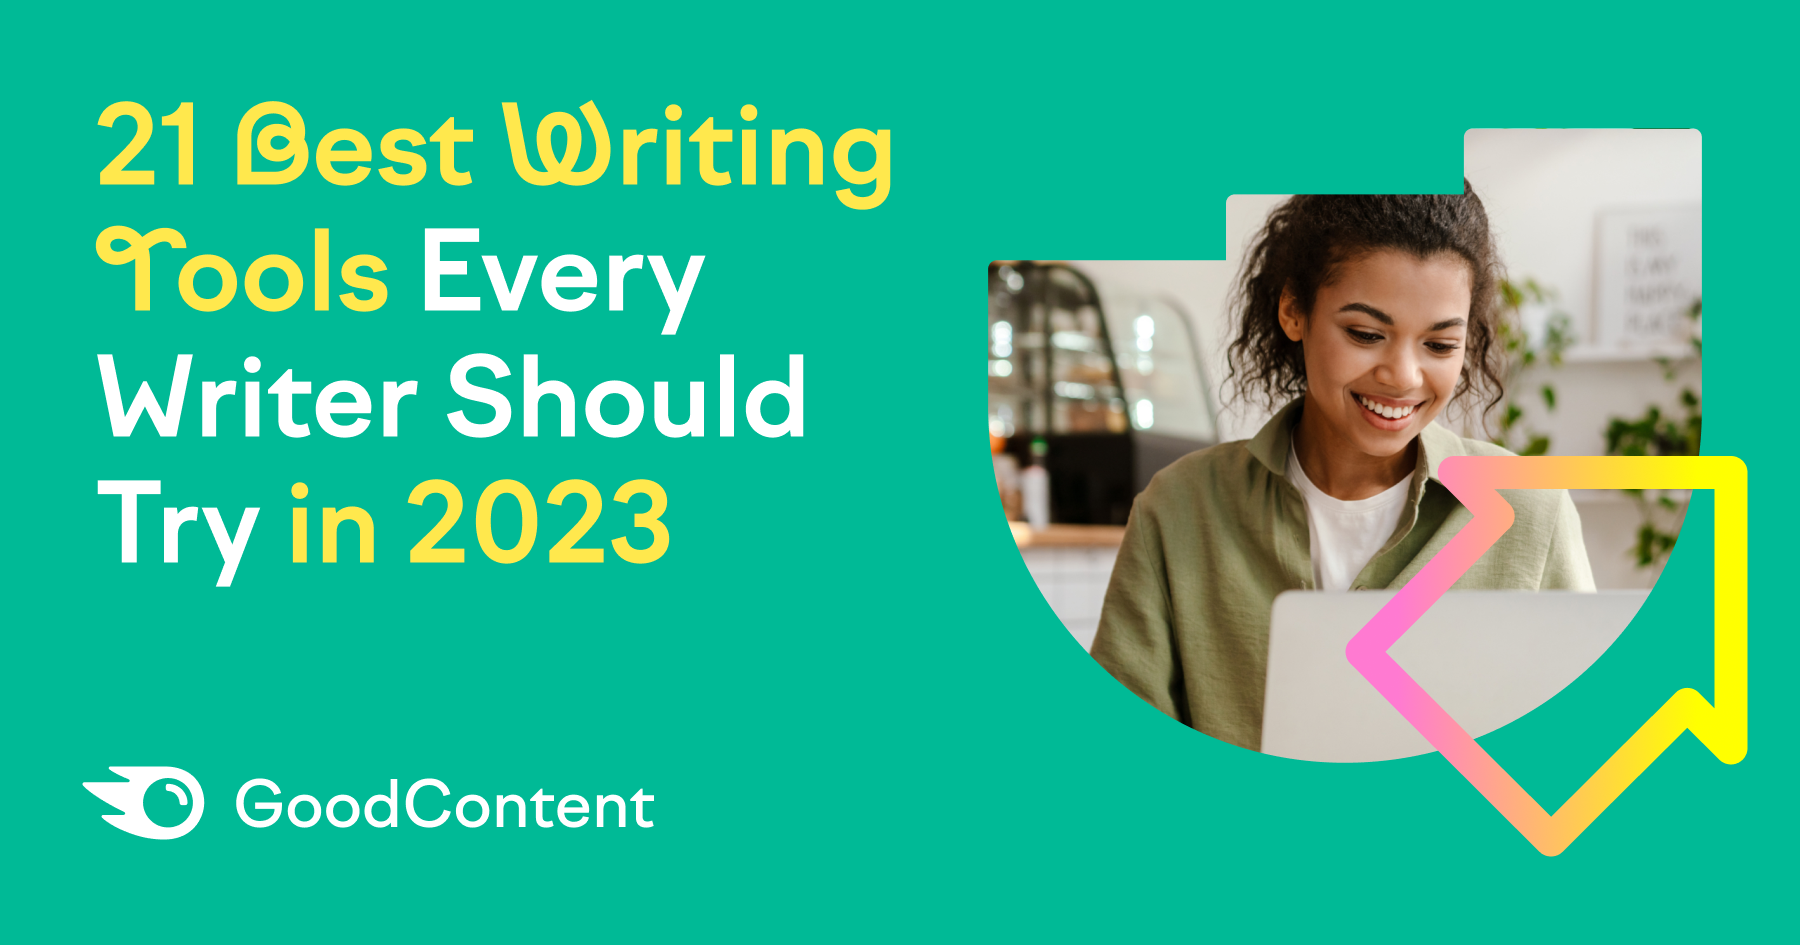 21 Top Writing Tools for 2023: What Writers Must Try and Why